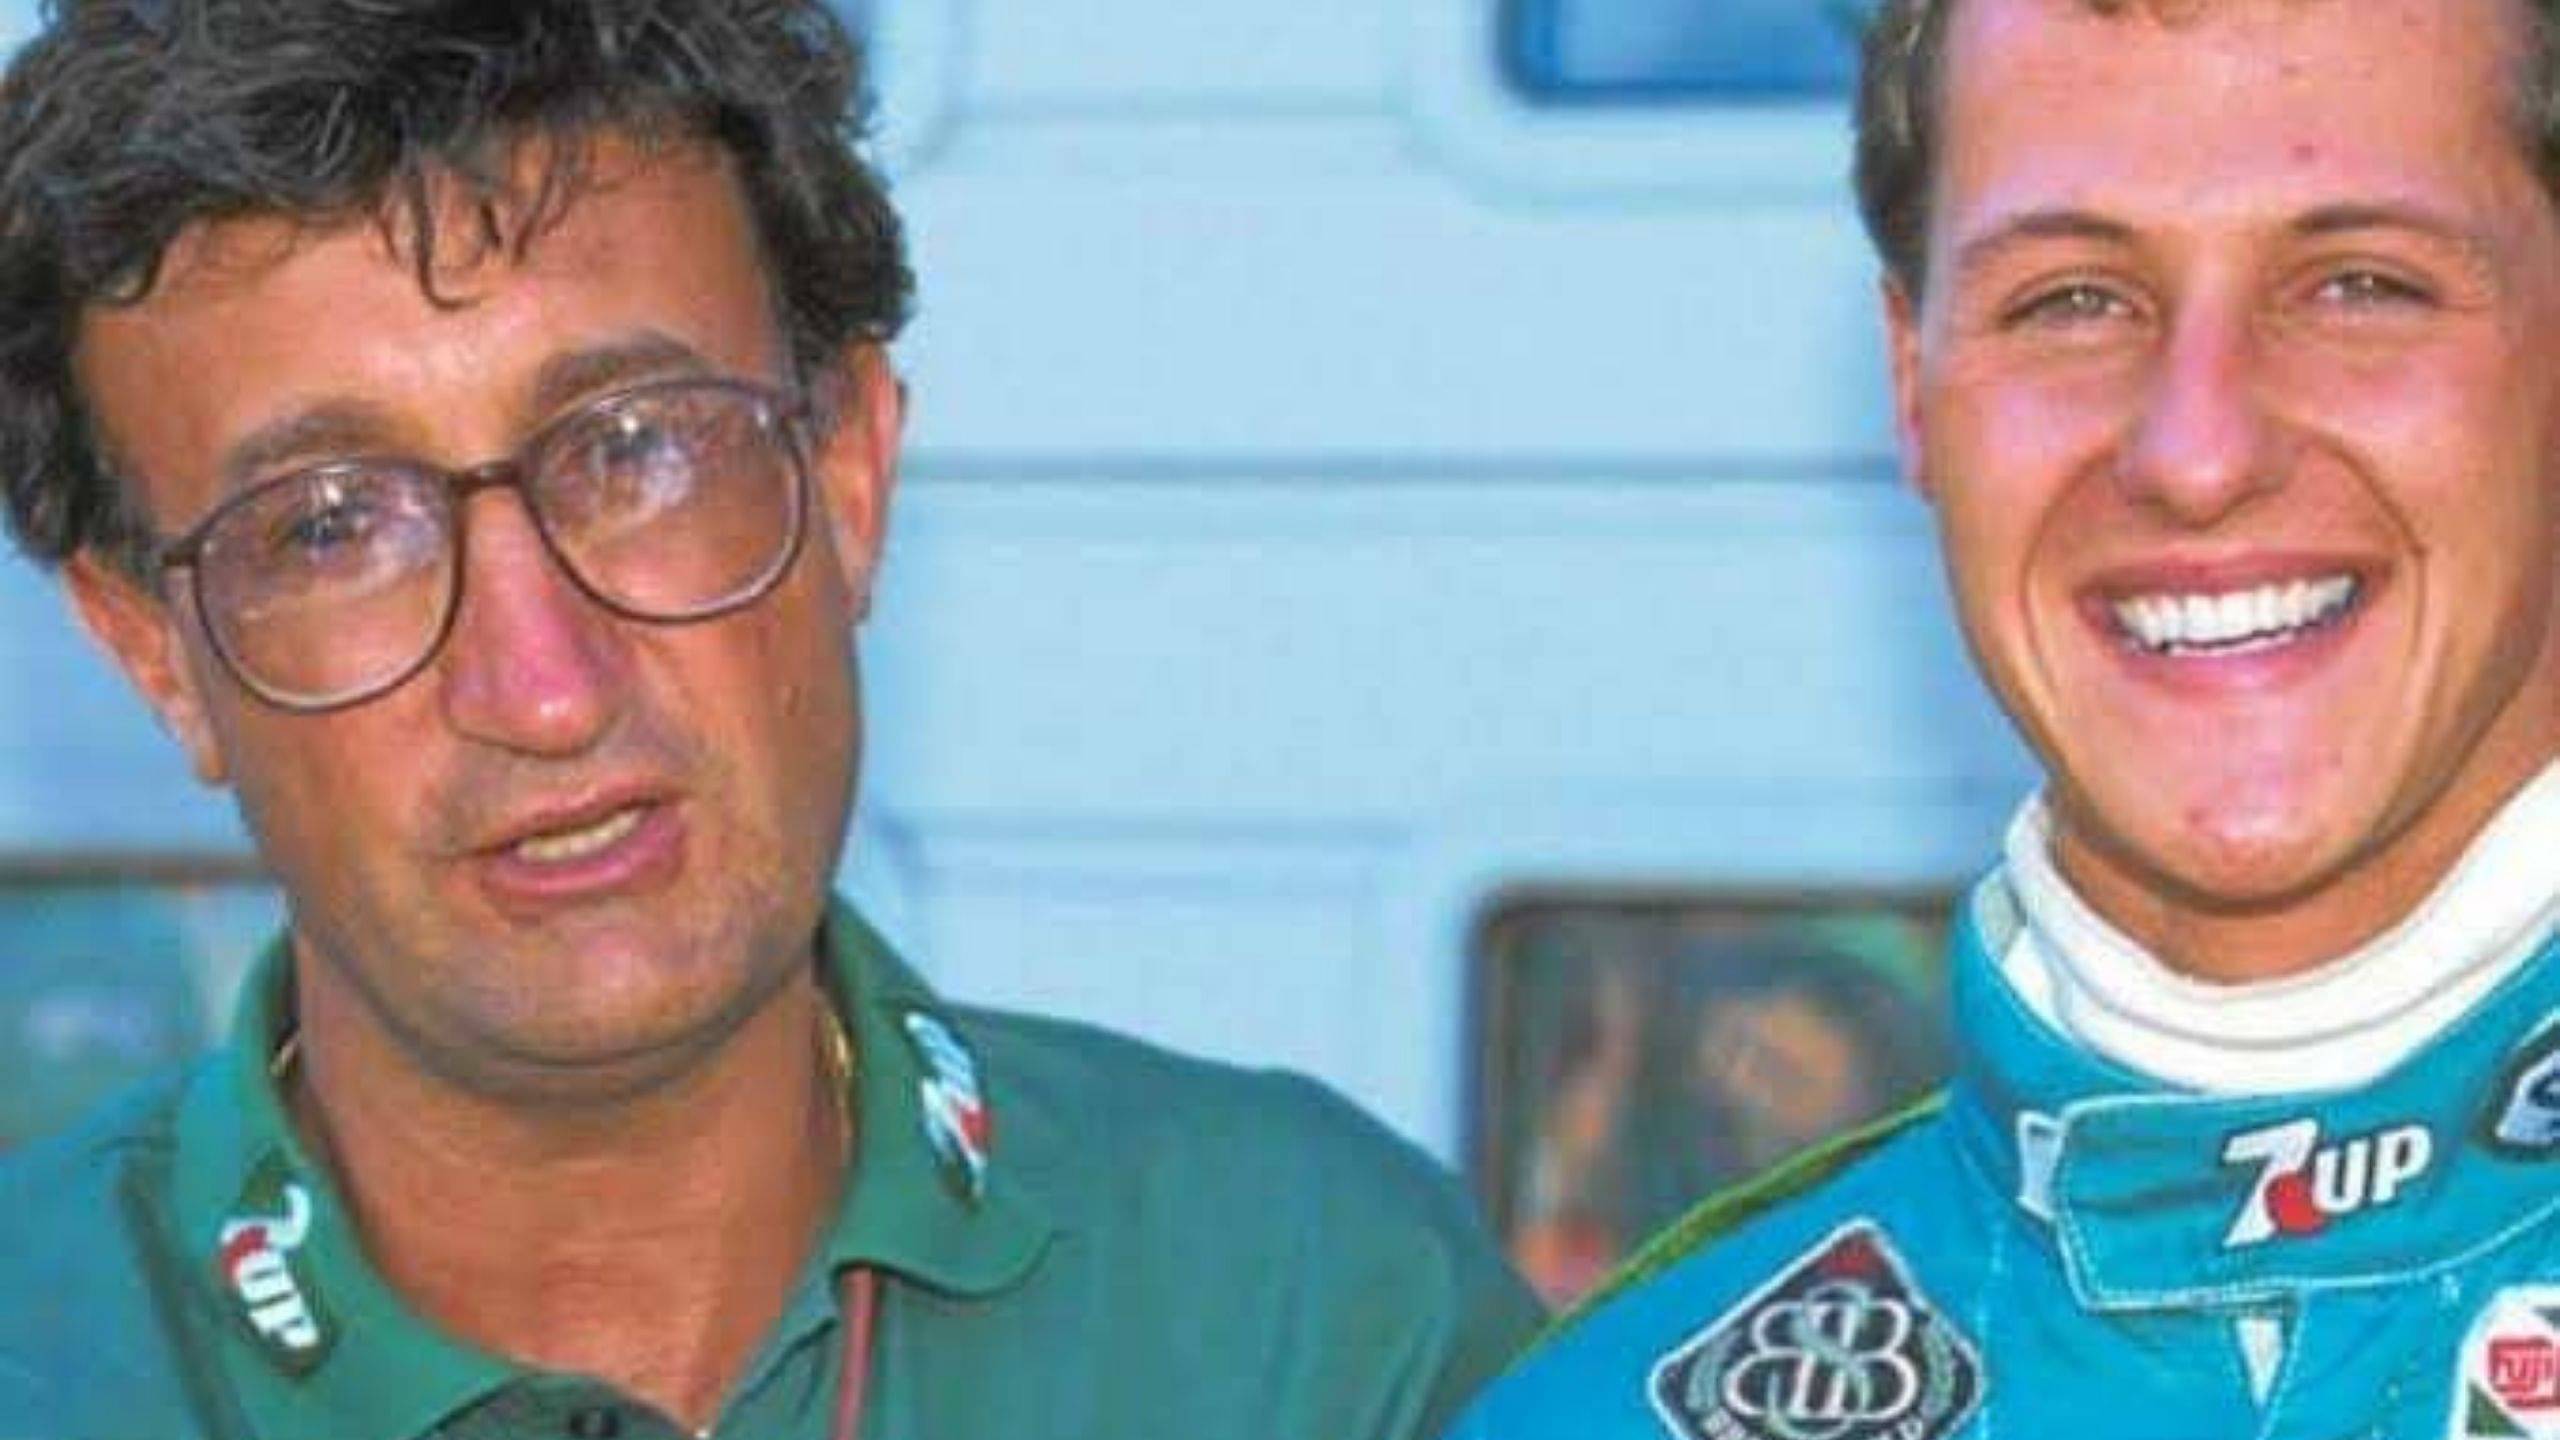 "And the rest, as they say, is history" - The incredible, unbelievable tale of how the legendary Michael Schumacher make his debut in Formula 1